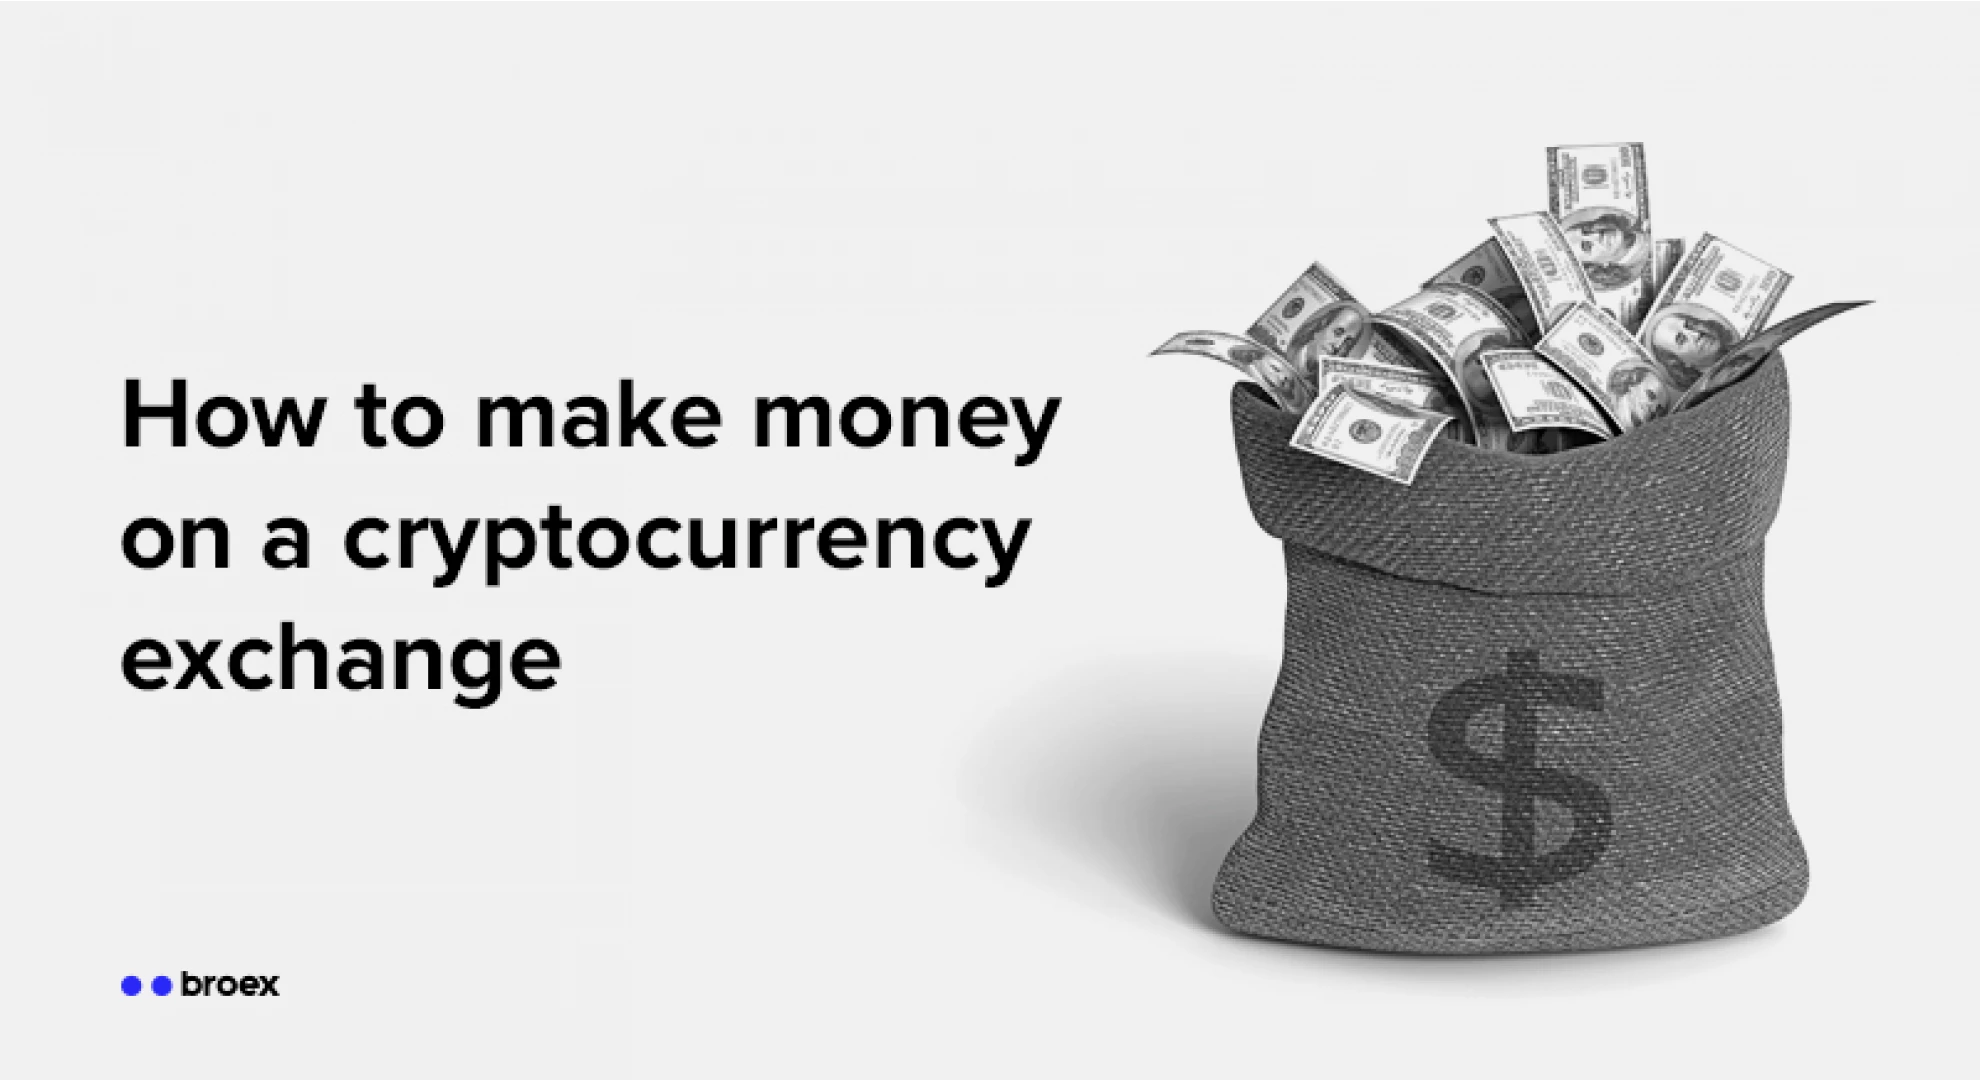 How to make money on a cryptocurrency exchange